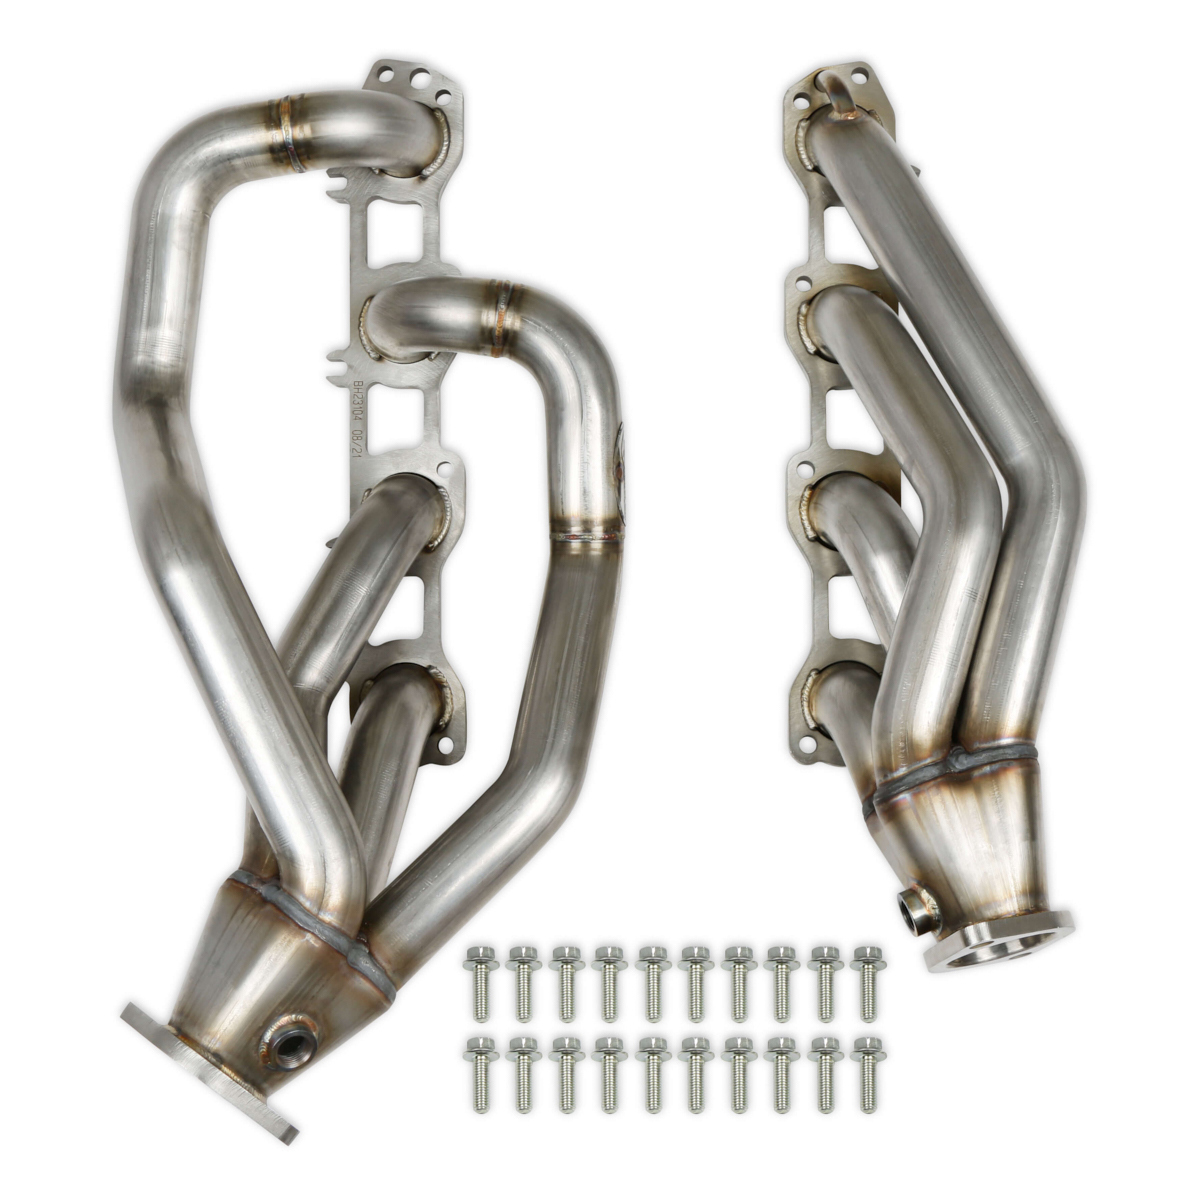 Hooker Headers BH23104 Headers, Blackheart, 1-3/4 in Primary, 2-1/2 in Collectors, Stainless, Natural, Dodge Dart / Mopar A-Body 1973-74, Pair